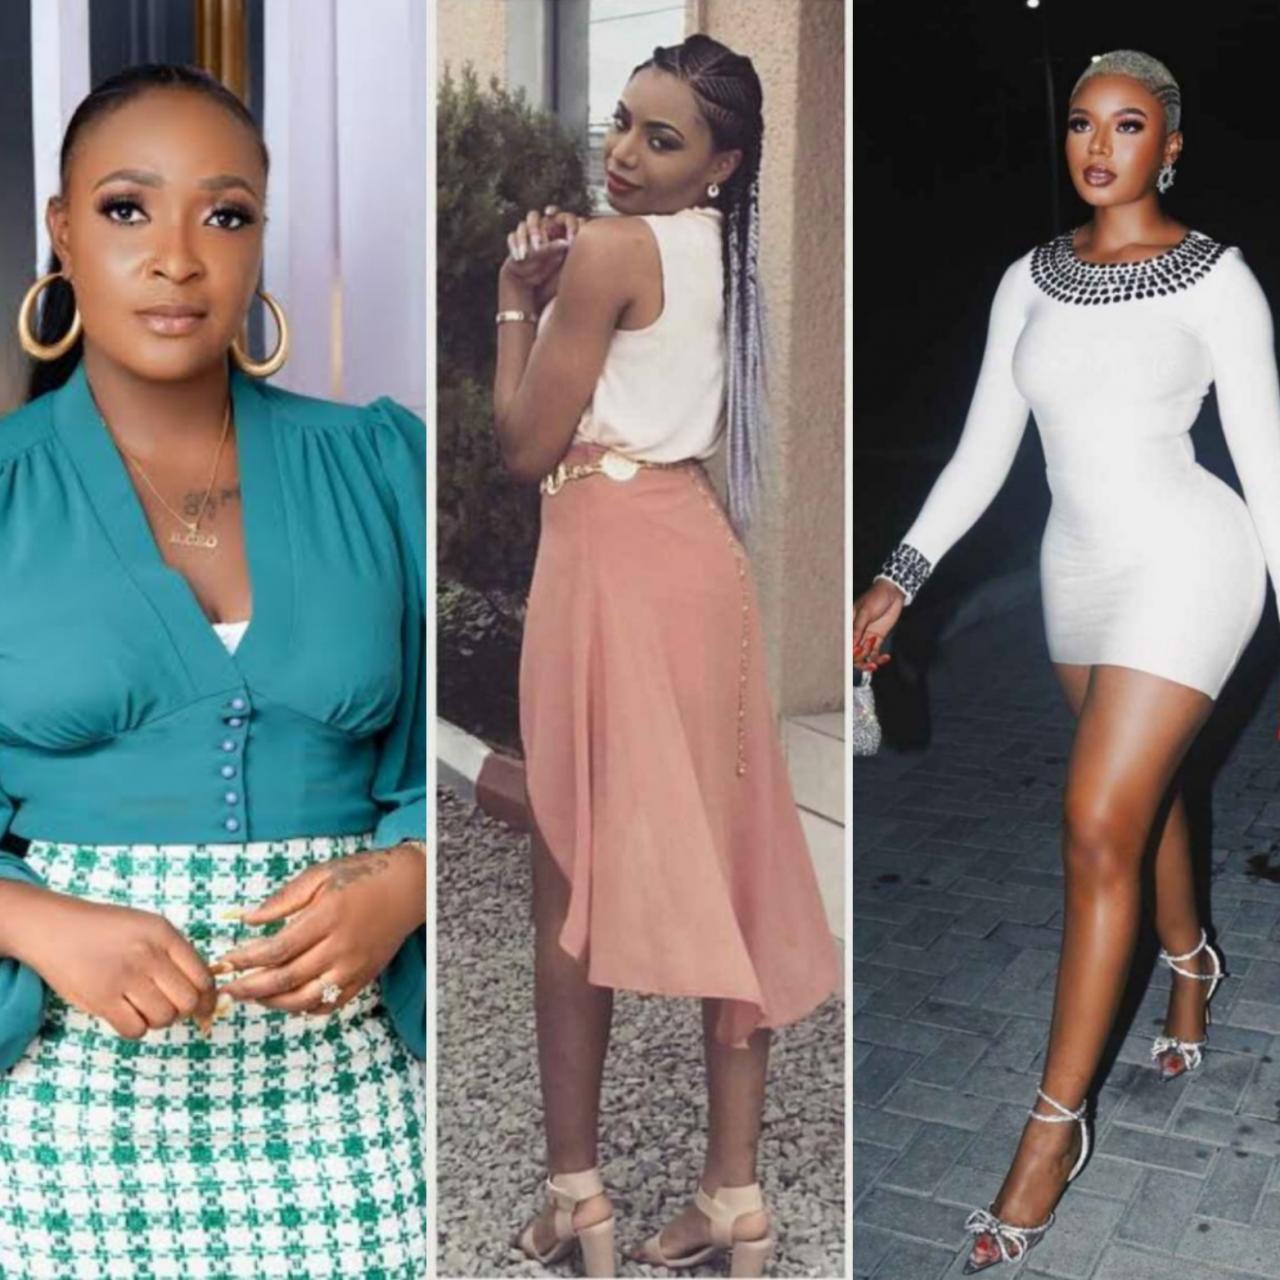 "Nancy Isime has done her body. Almost 90 per cent of Nigerian celebrities have gone under the knife" - Blessing Okoro says (video)